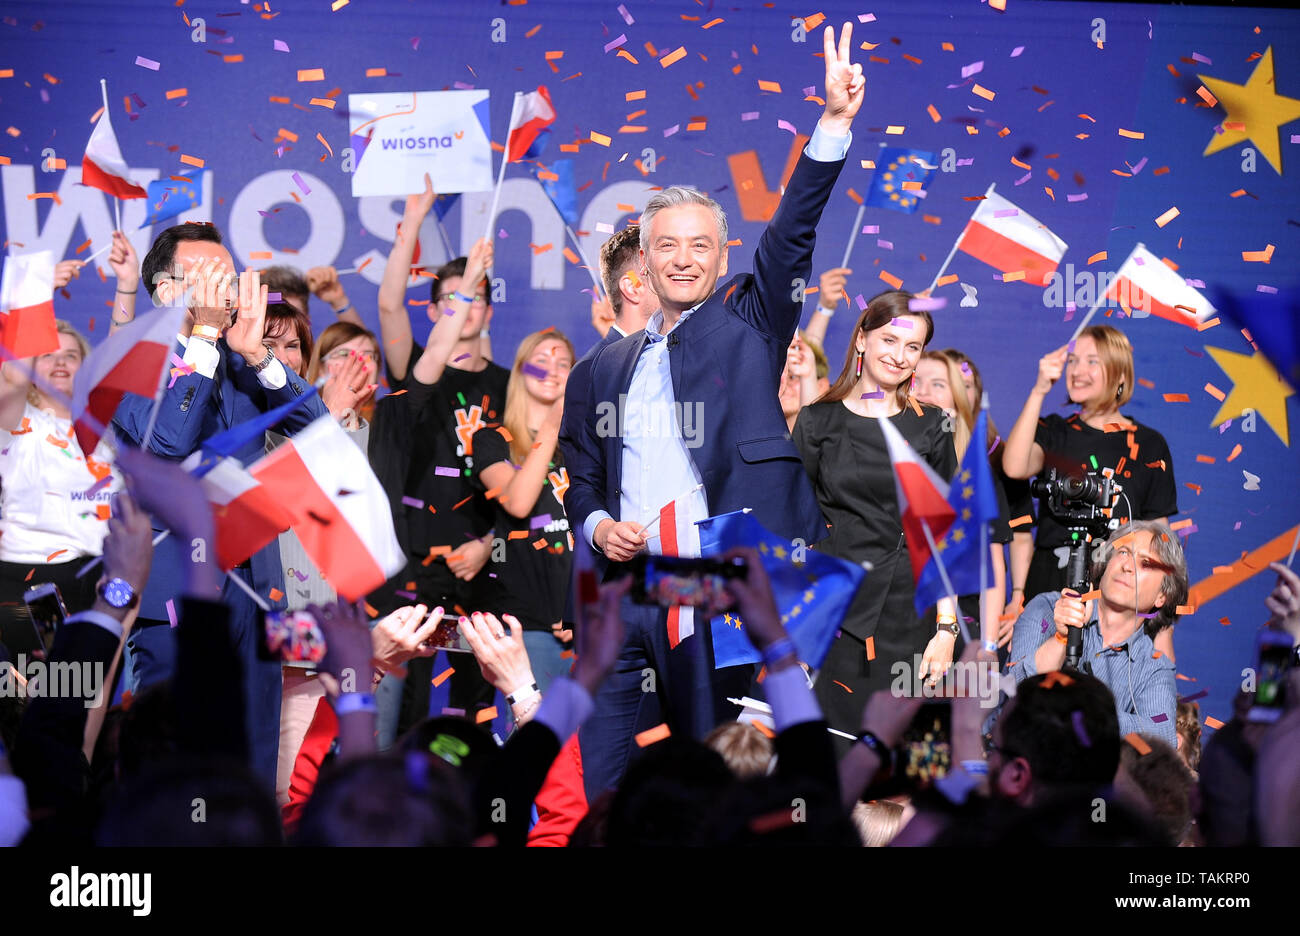 Robert Biedron  The European Parliament election evening at Wiosna (The Spring) headquarters on May 26, 2019 in Warsaw, Poland.   Wiosna gets 6.6% of Stock Photo